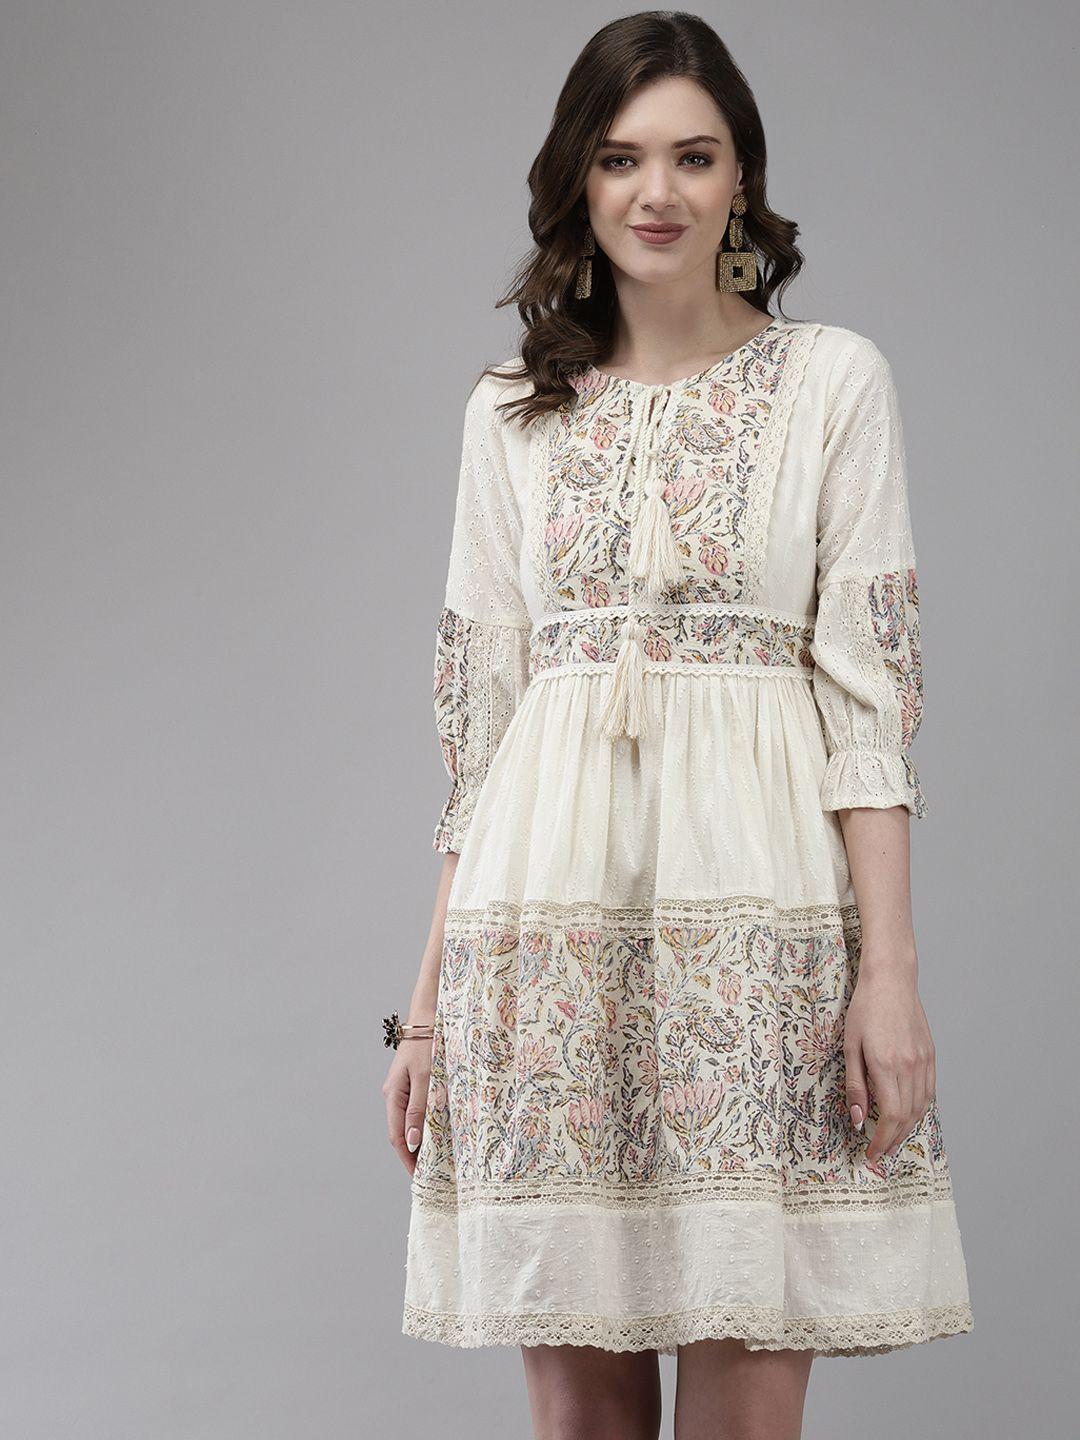 ishin-off-white-floral-embroidered-tie-up-neck-a-line-dress